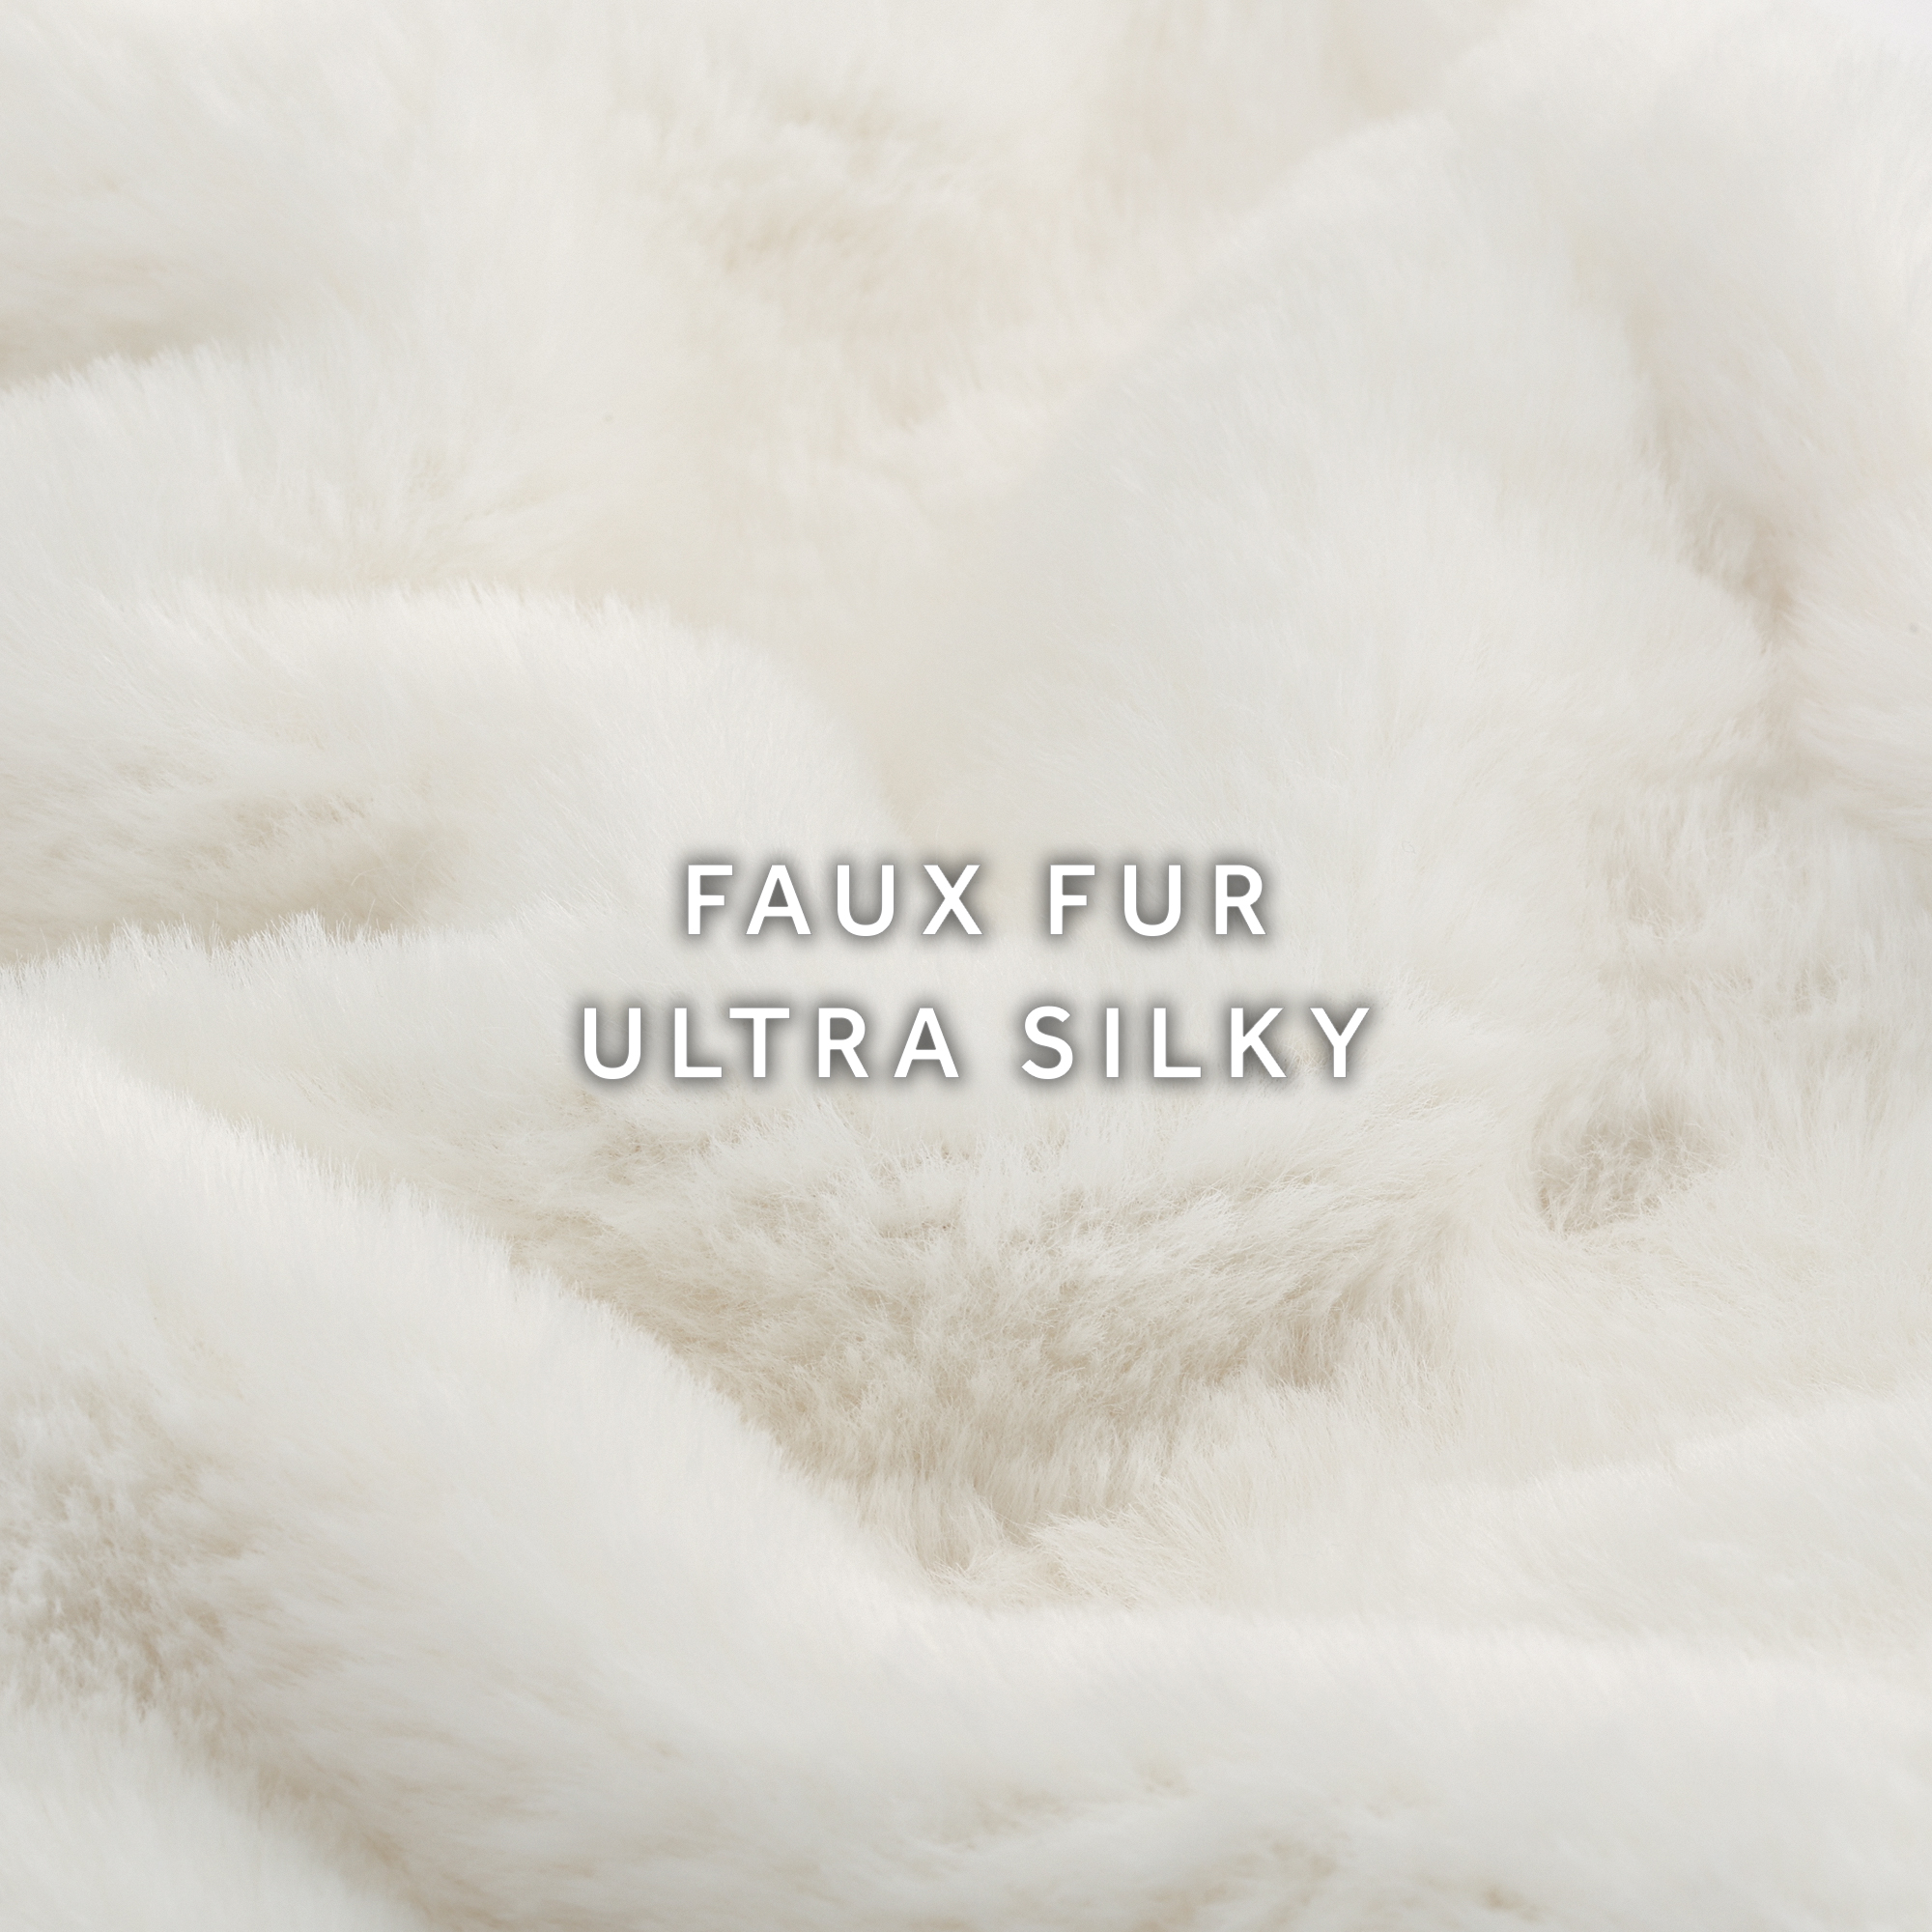 Sunbeam White Faux Fur Heated Electric Throw - image 2 of 8